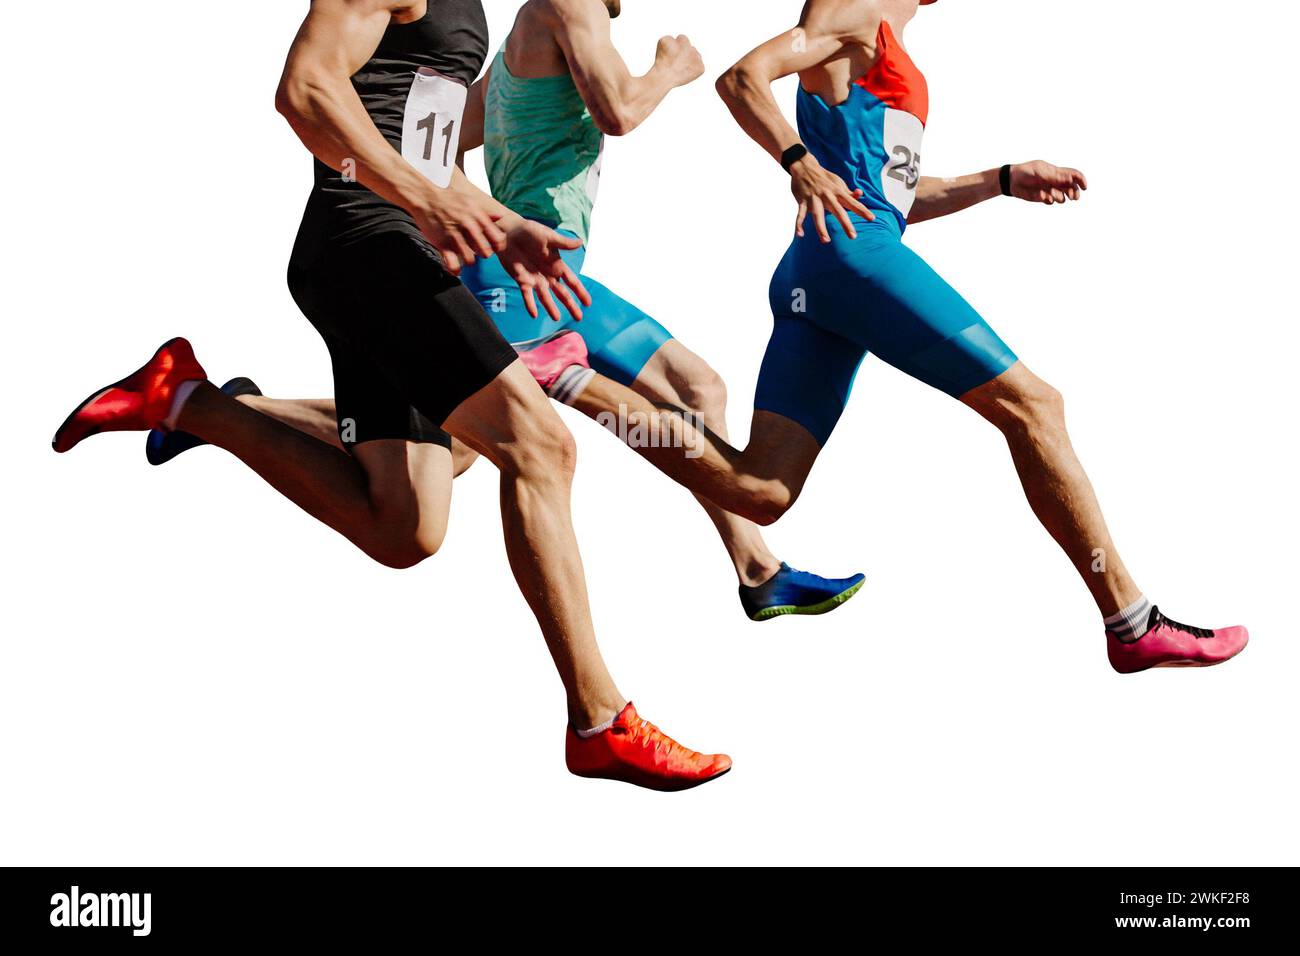 three male athletes sprinting on track, muscles taut, competing fiercely, isolated on white background Stock Photo